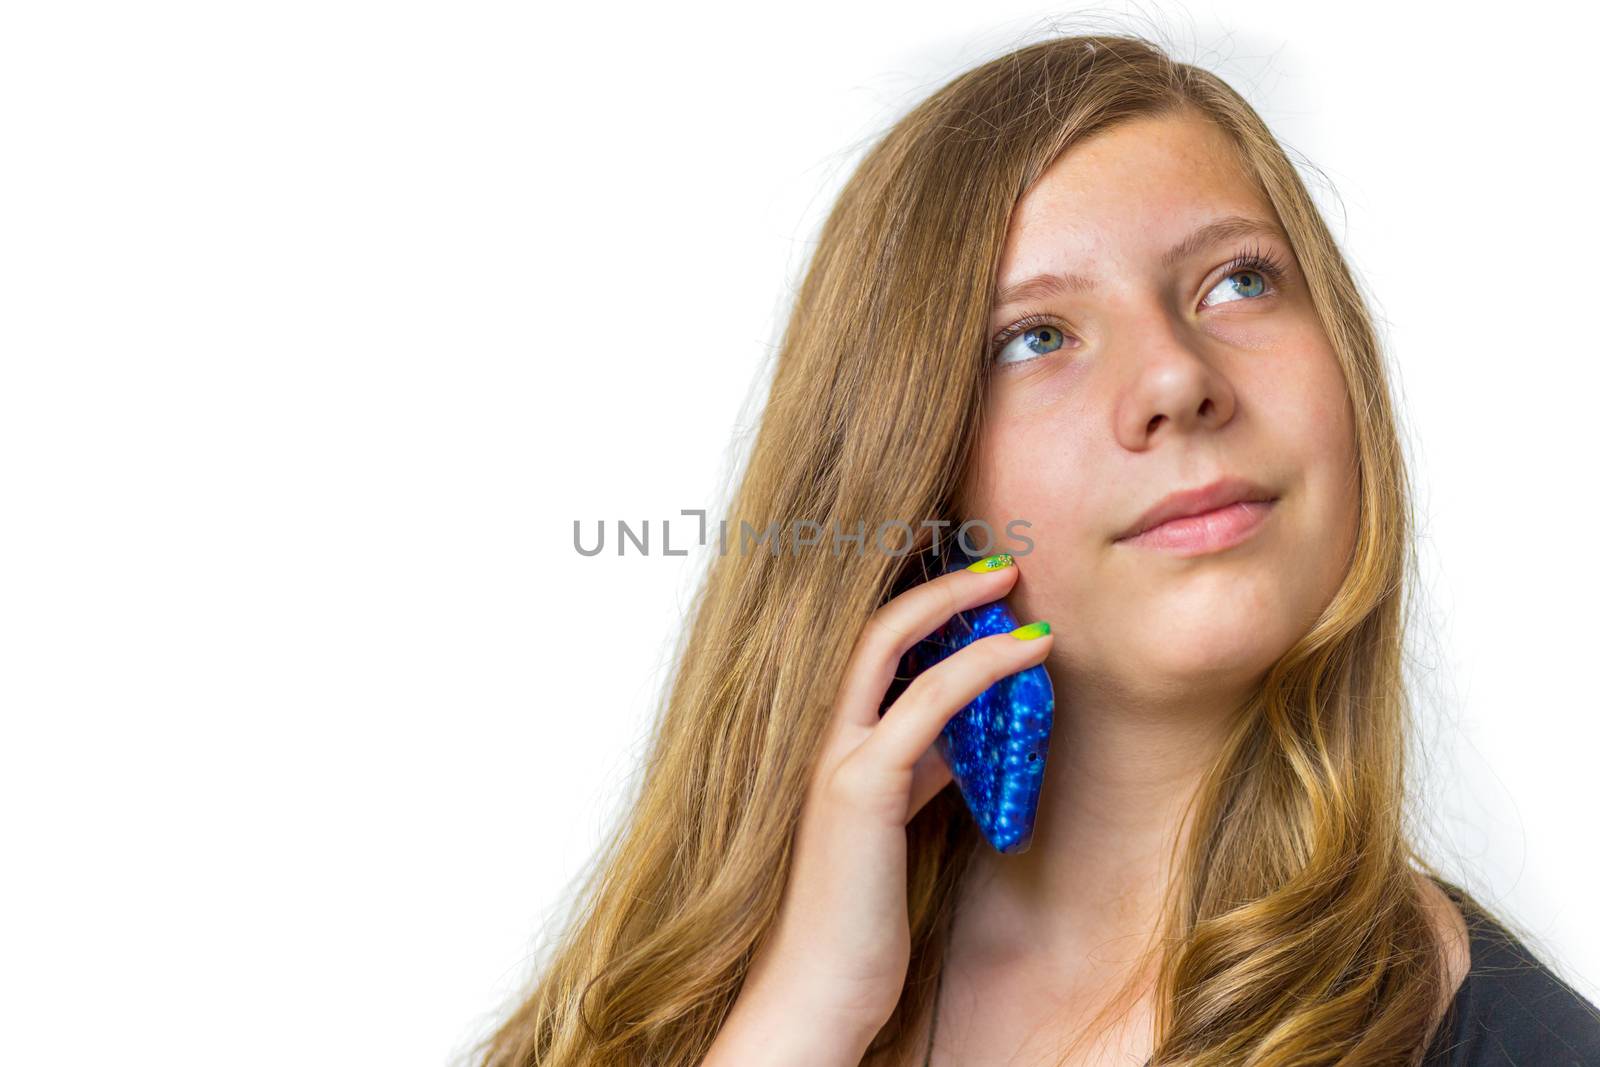 Dutch teenage girl calling with mobile phone by BenSchonewille